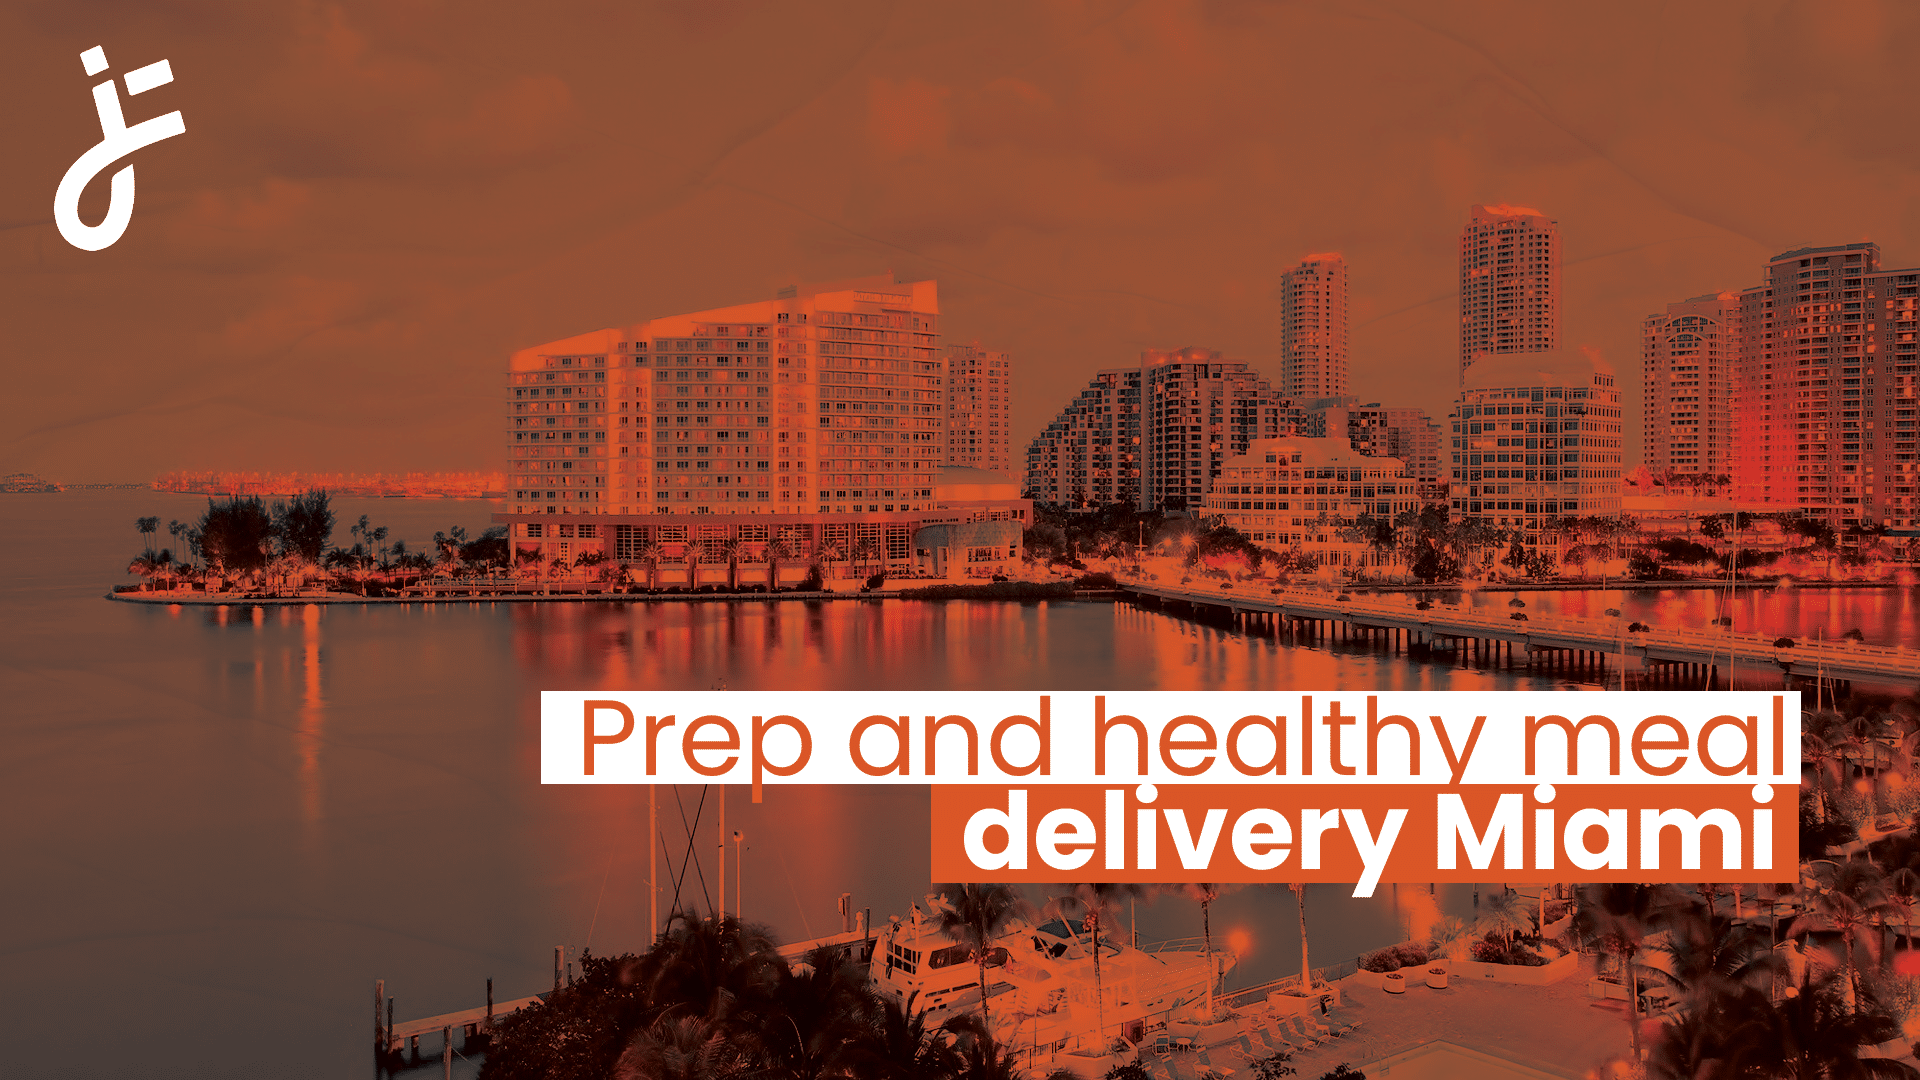 Prep and healthy meal delivery Miami